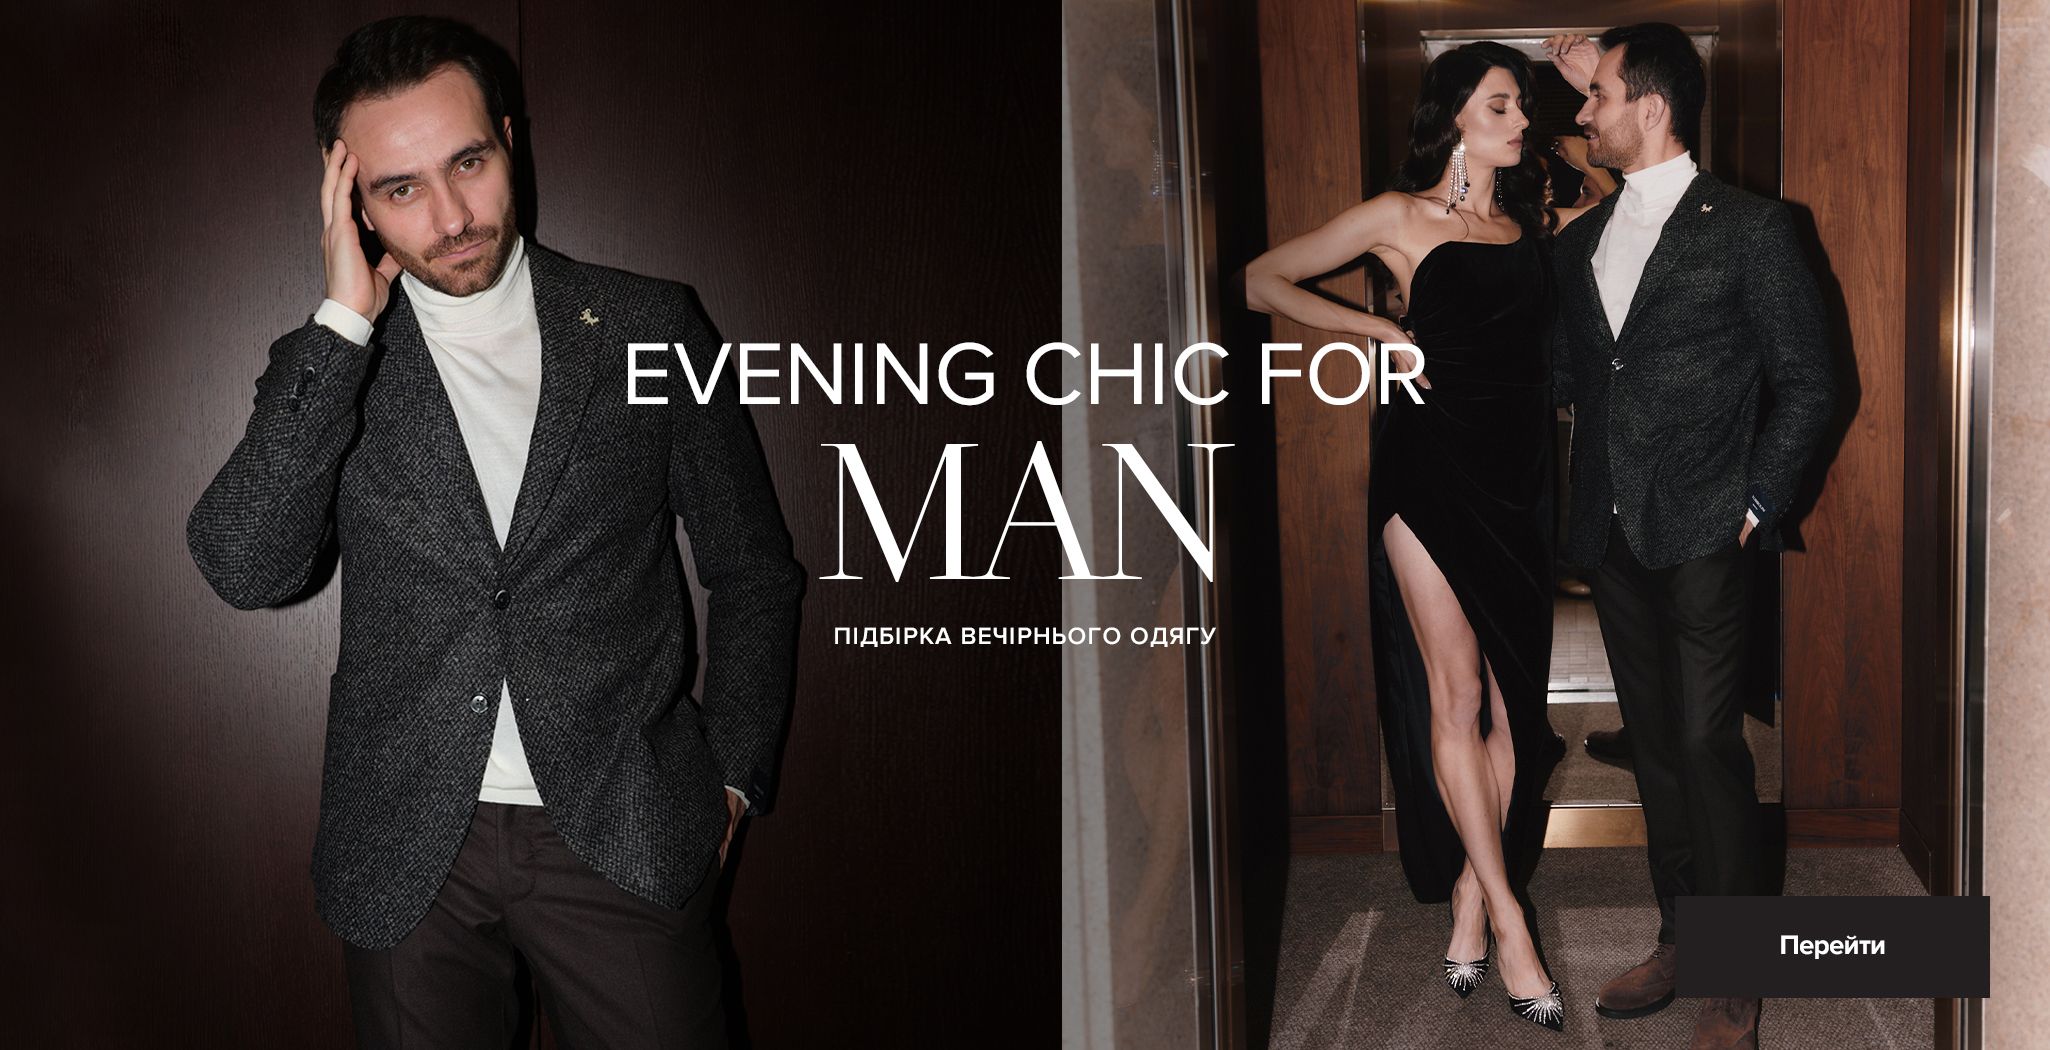 EVENING CHIC FOR MAN